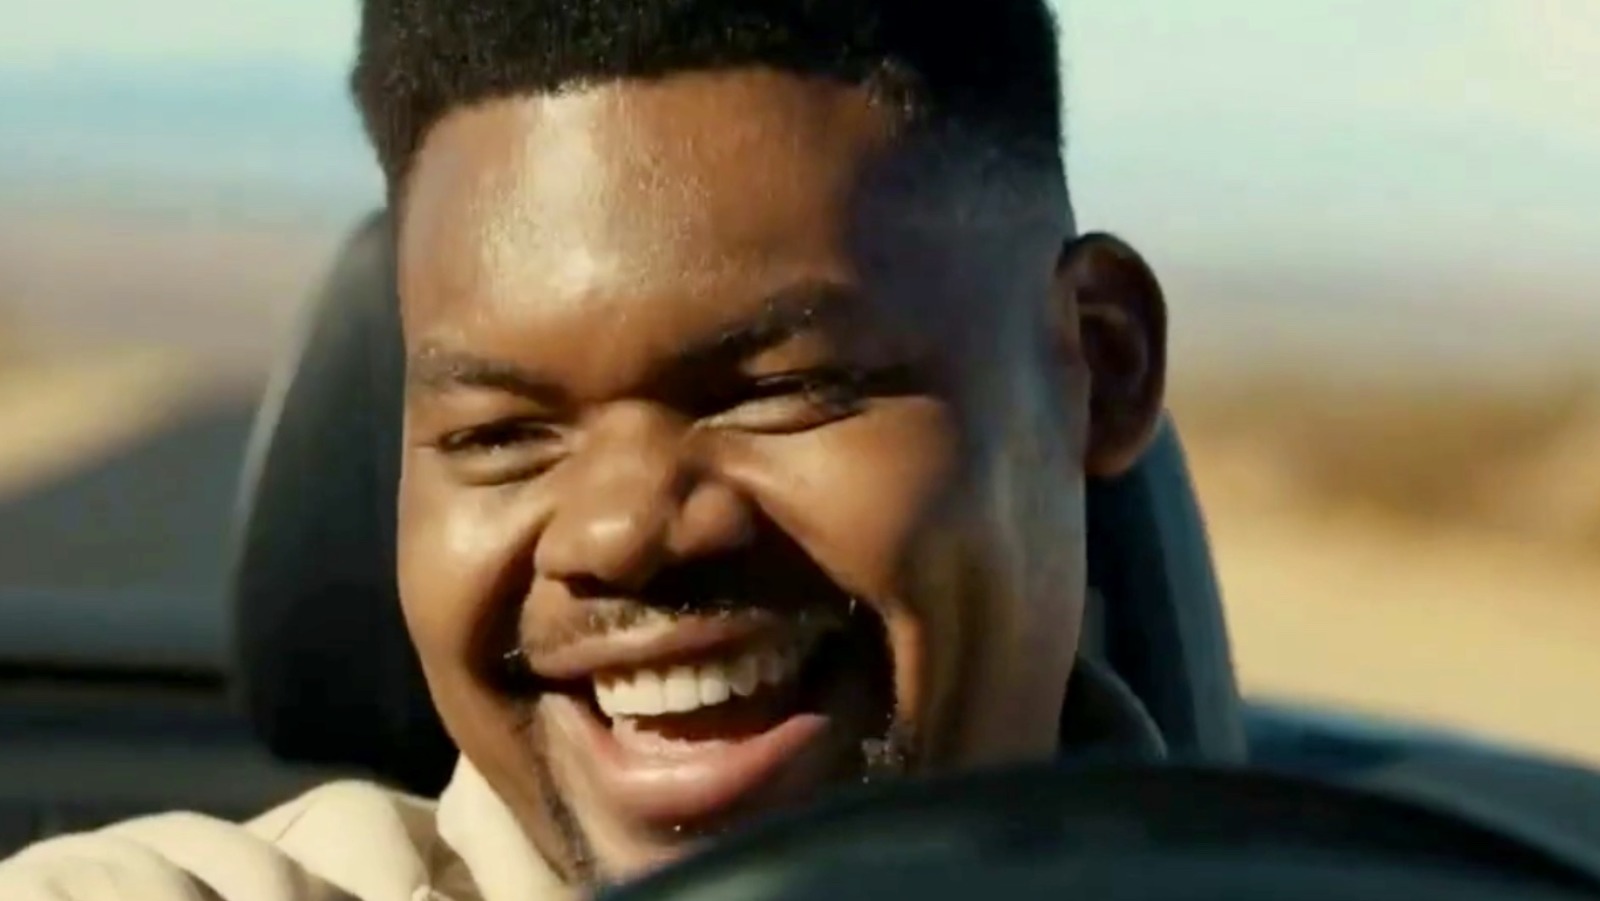 Who is the black guy driving the car in the Allstate commercial?